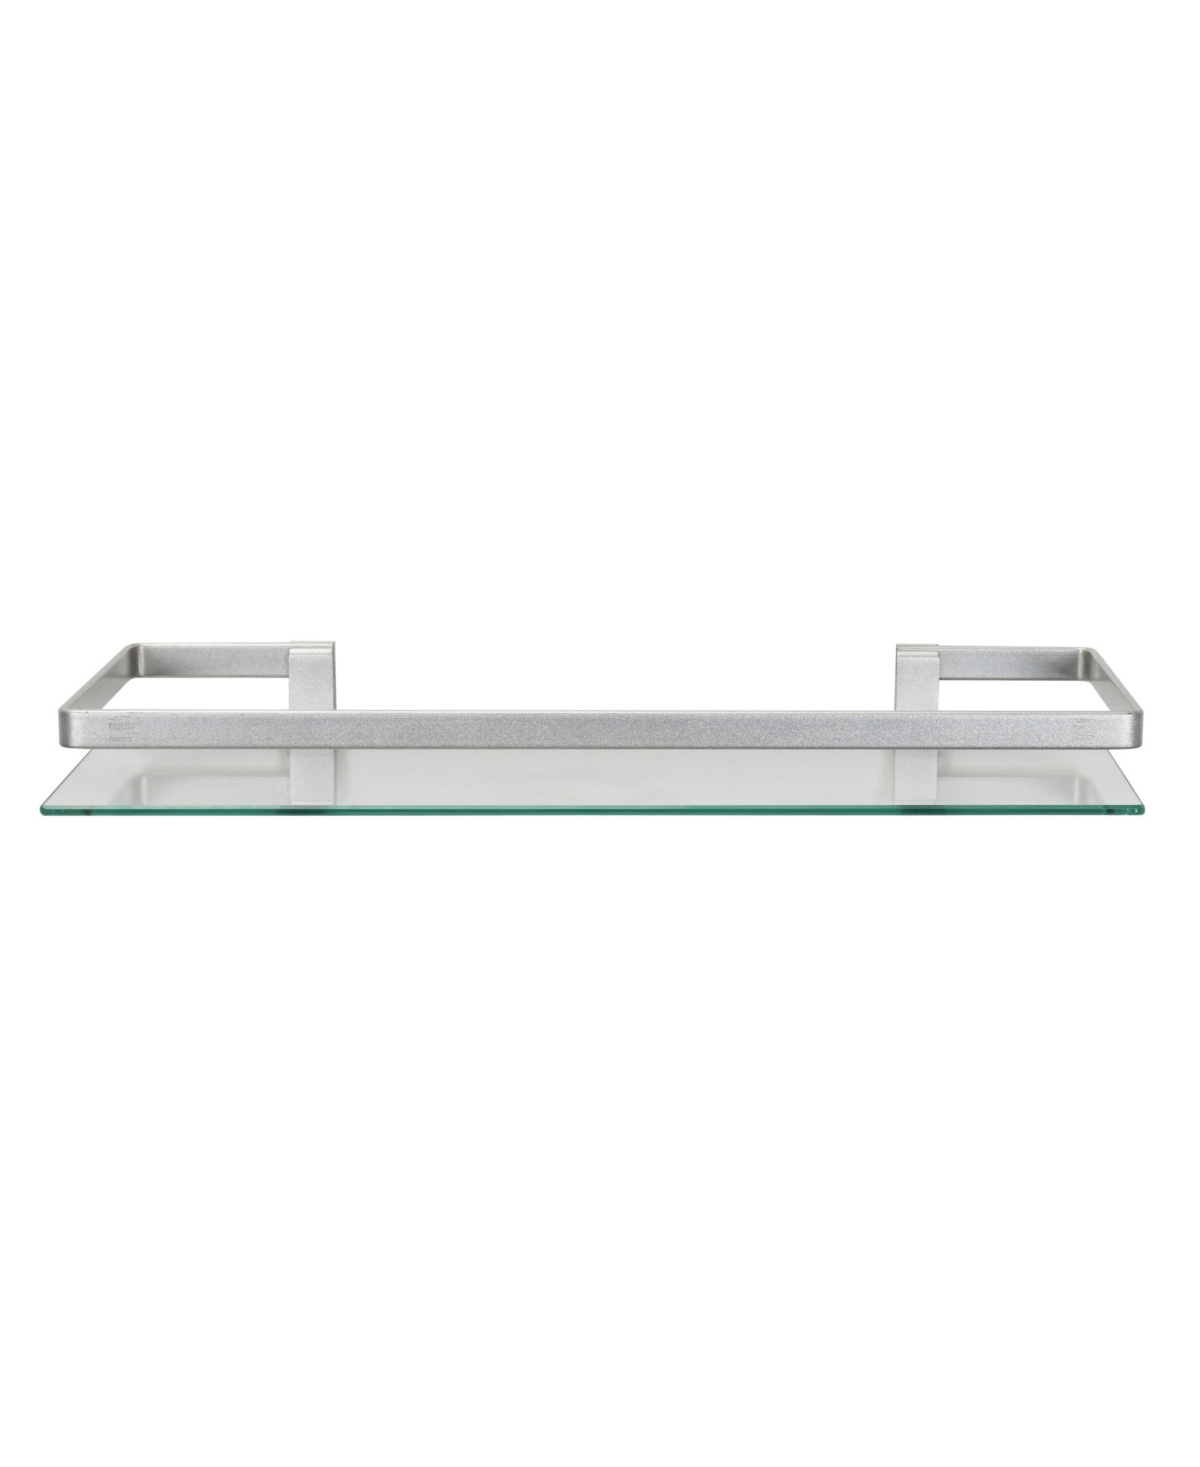 Floating Wall Mount Tempered Glass Bathroom Shelf with Brushed Chrome Rail - Chrome, Glass